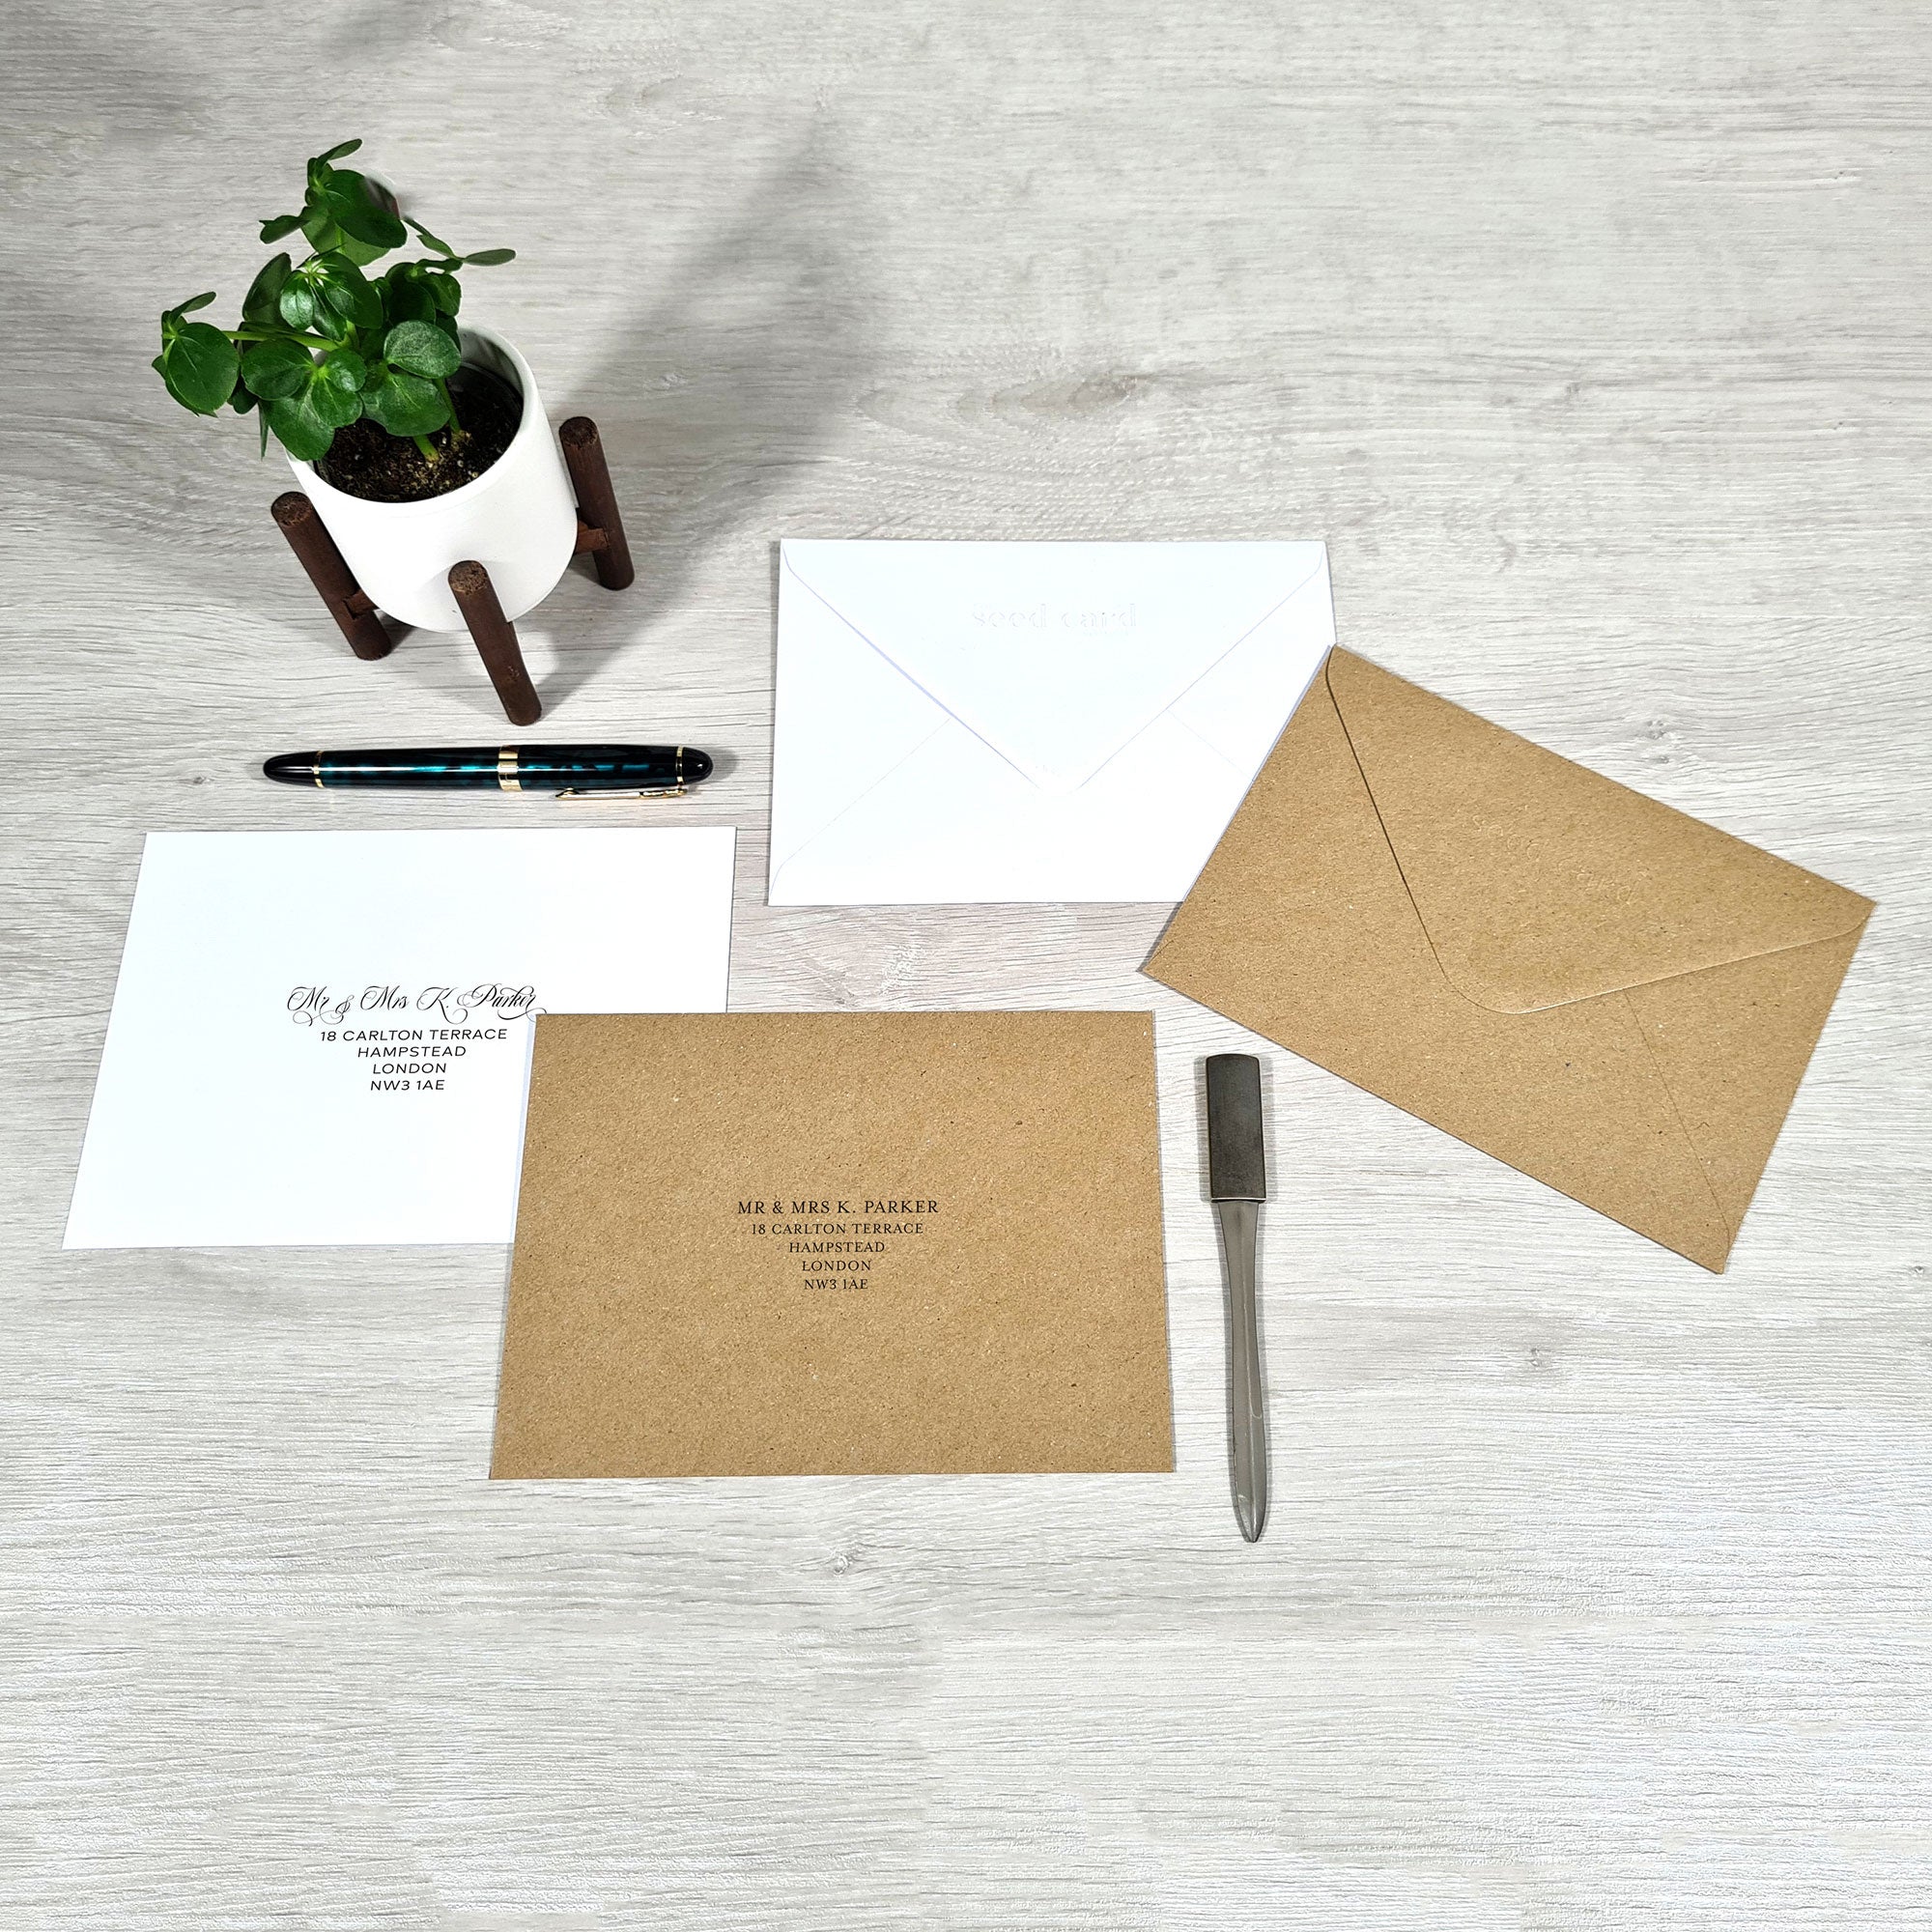 Shop online Opulence - 100% biodegradable seed-embedded cards Shop -The Seed Card Company